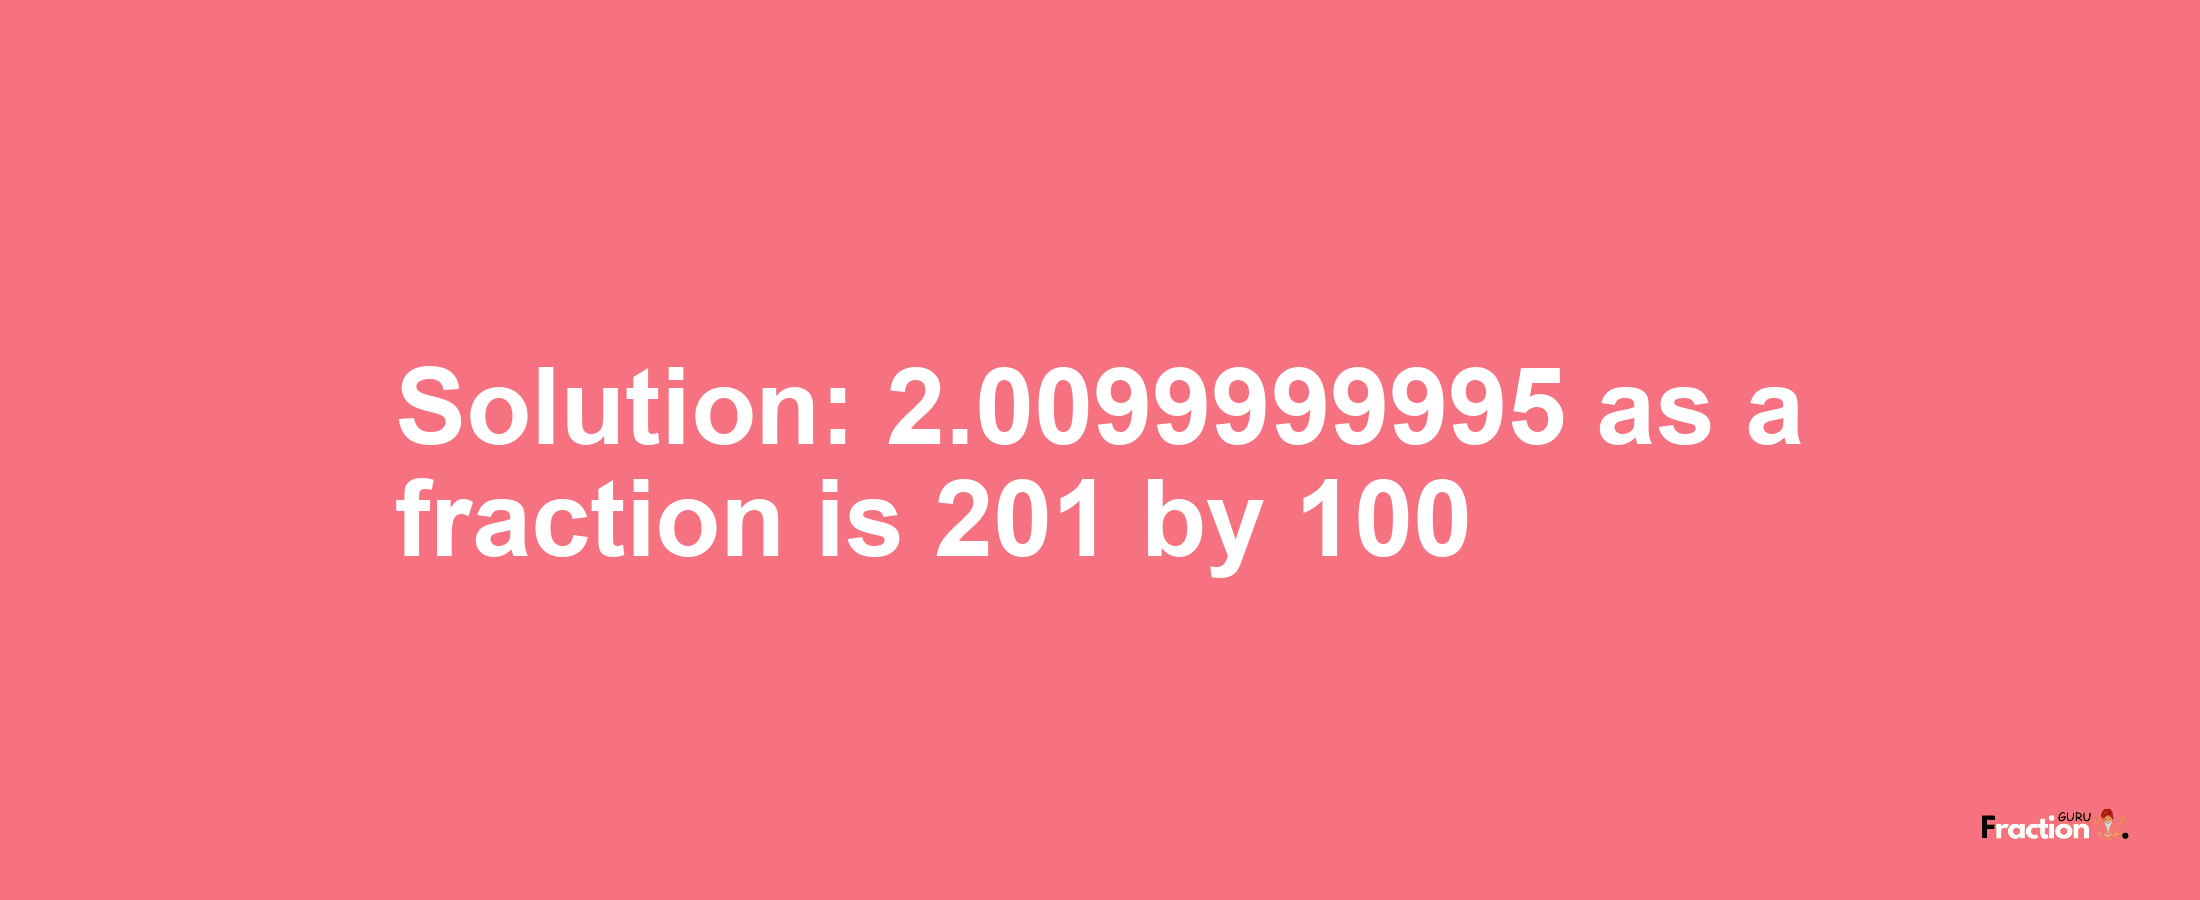 Solution:2.0099999995 as a fraction is 201/100